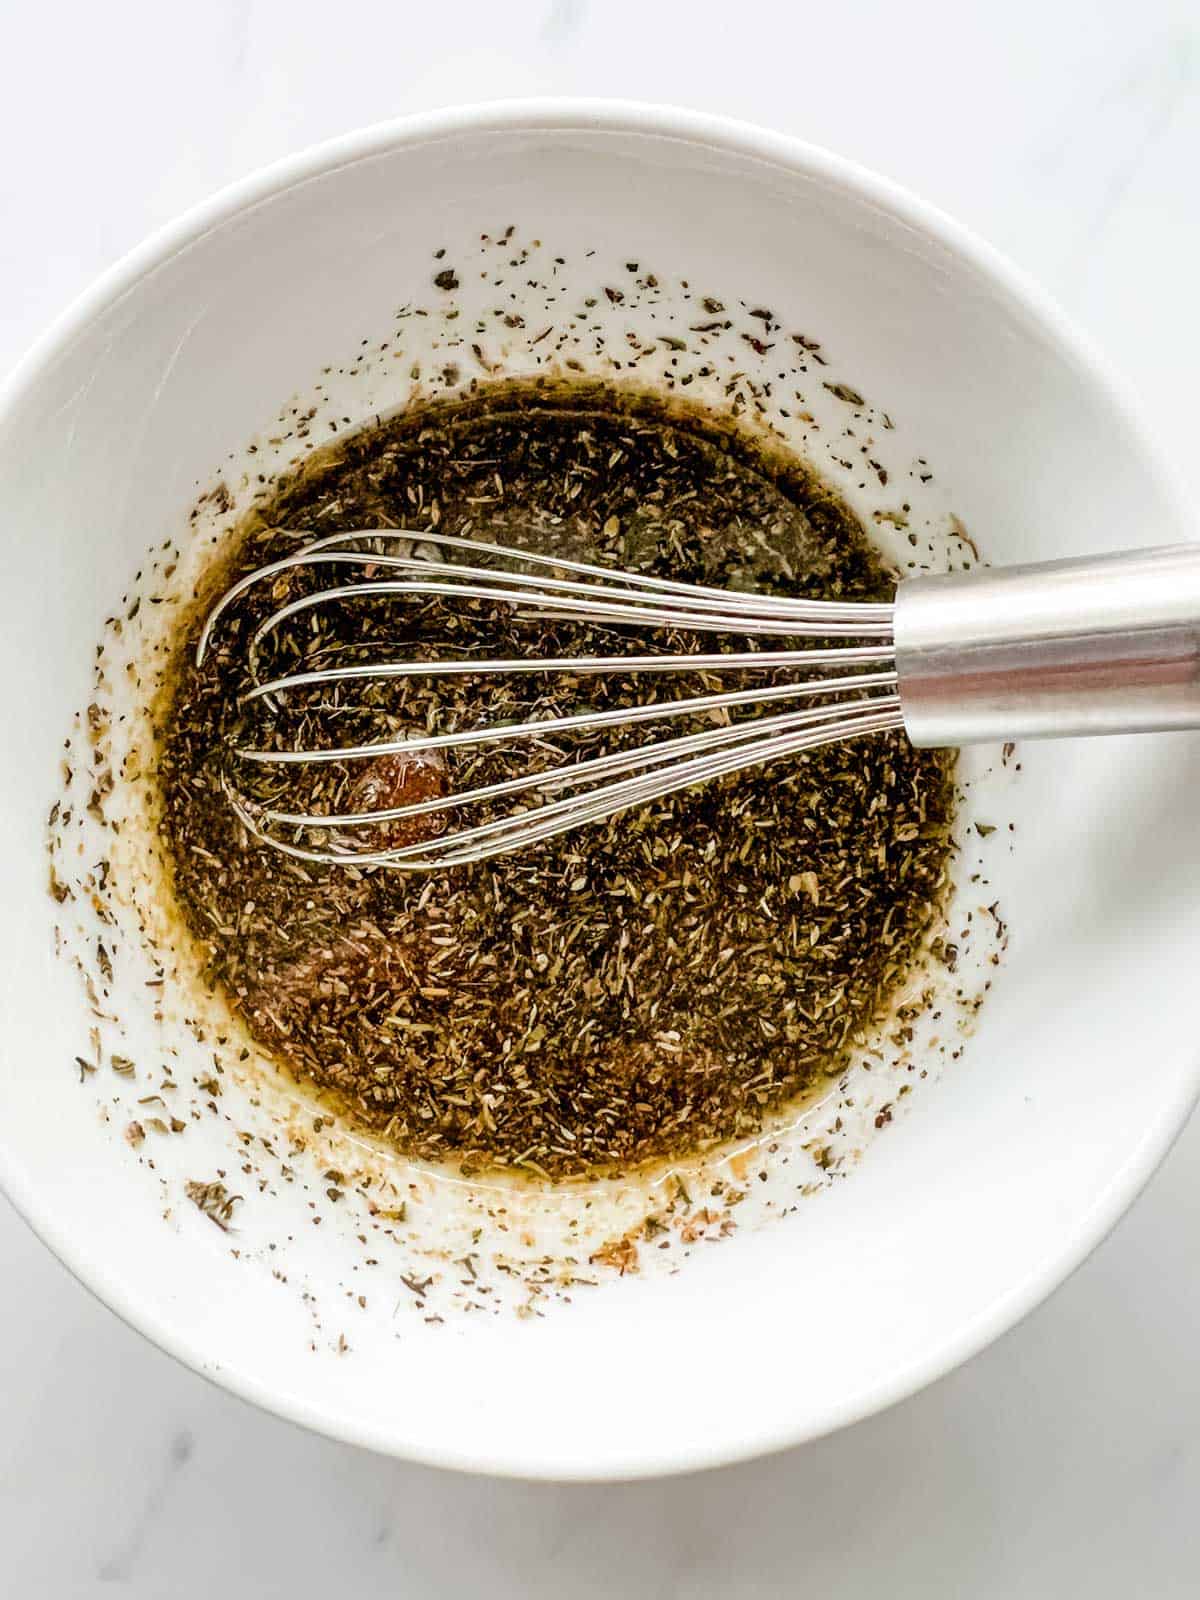 Photo of salmon marinade being whisked together in a bowl.